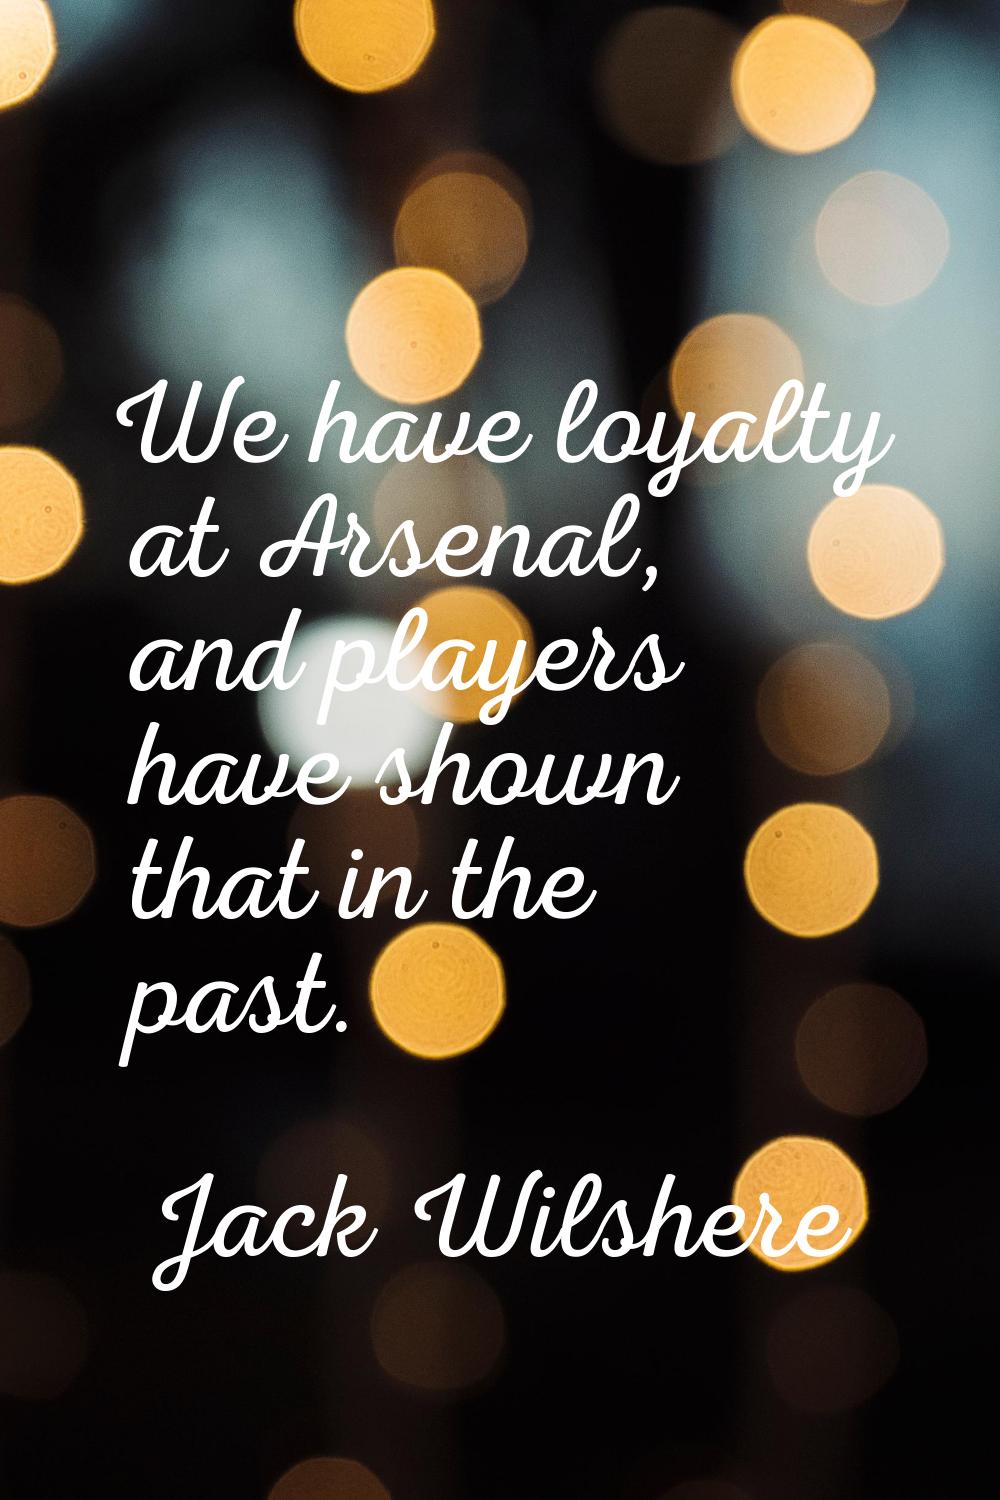 We have loyalty at Arsenal, and players have shown that in the past.